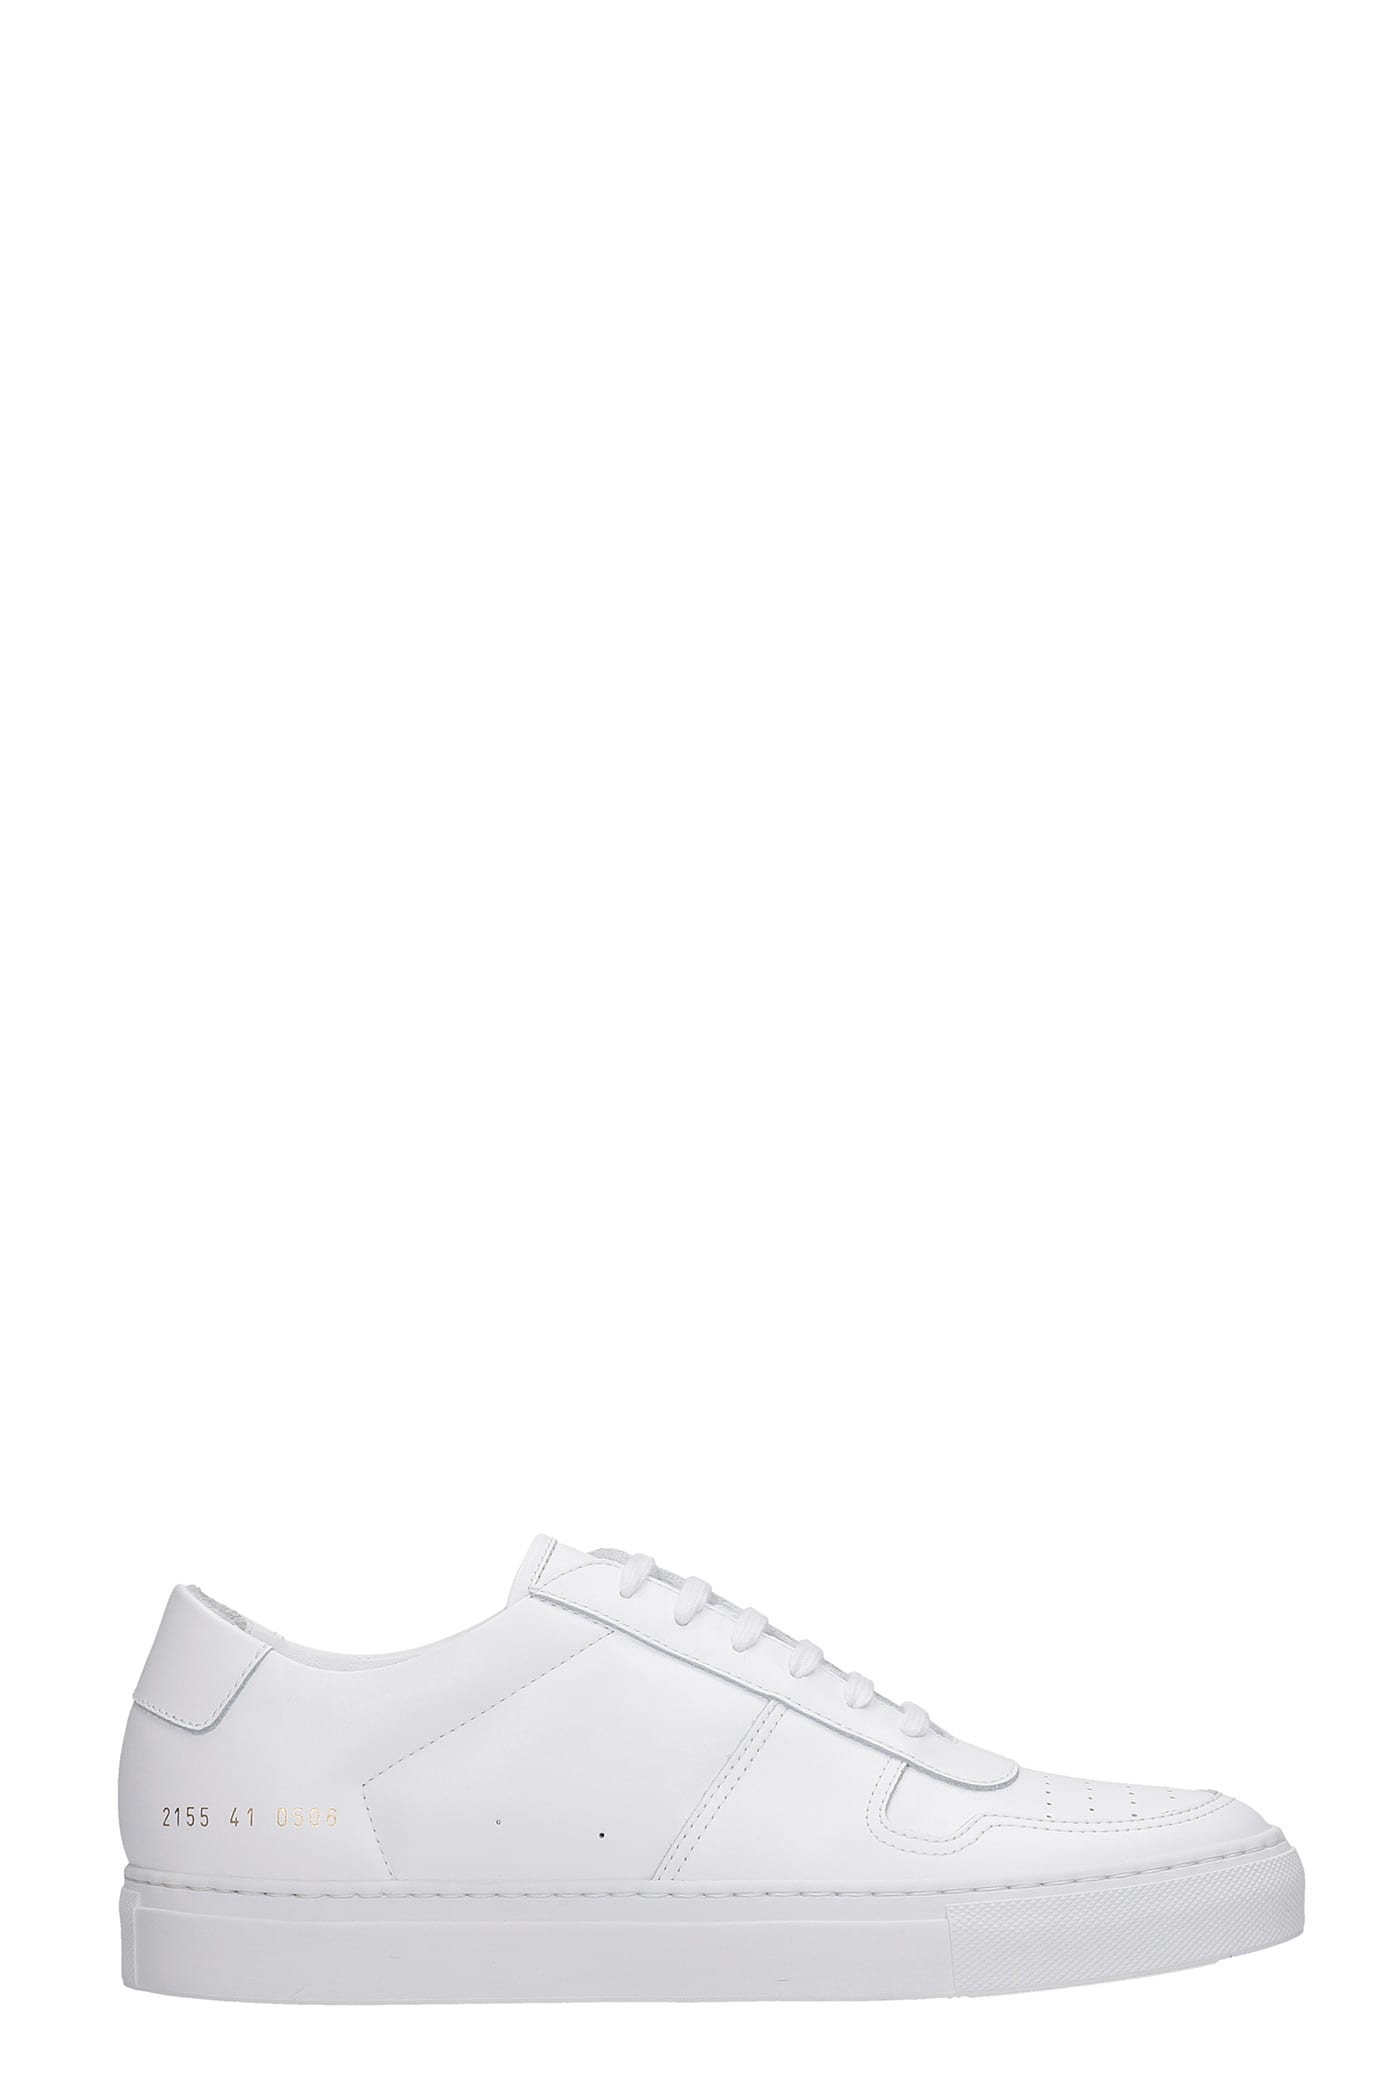 Common Projects B-ball Sneakers In White Leather